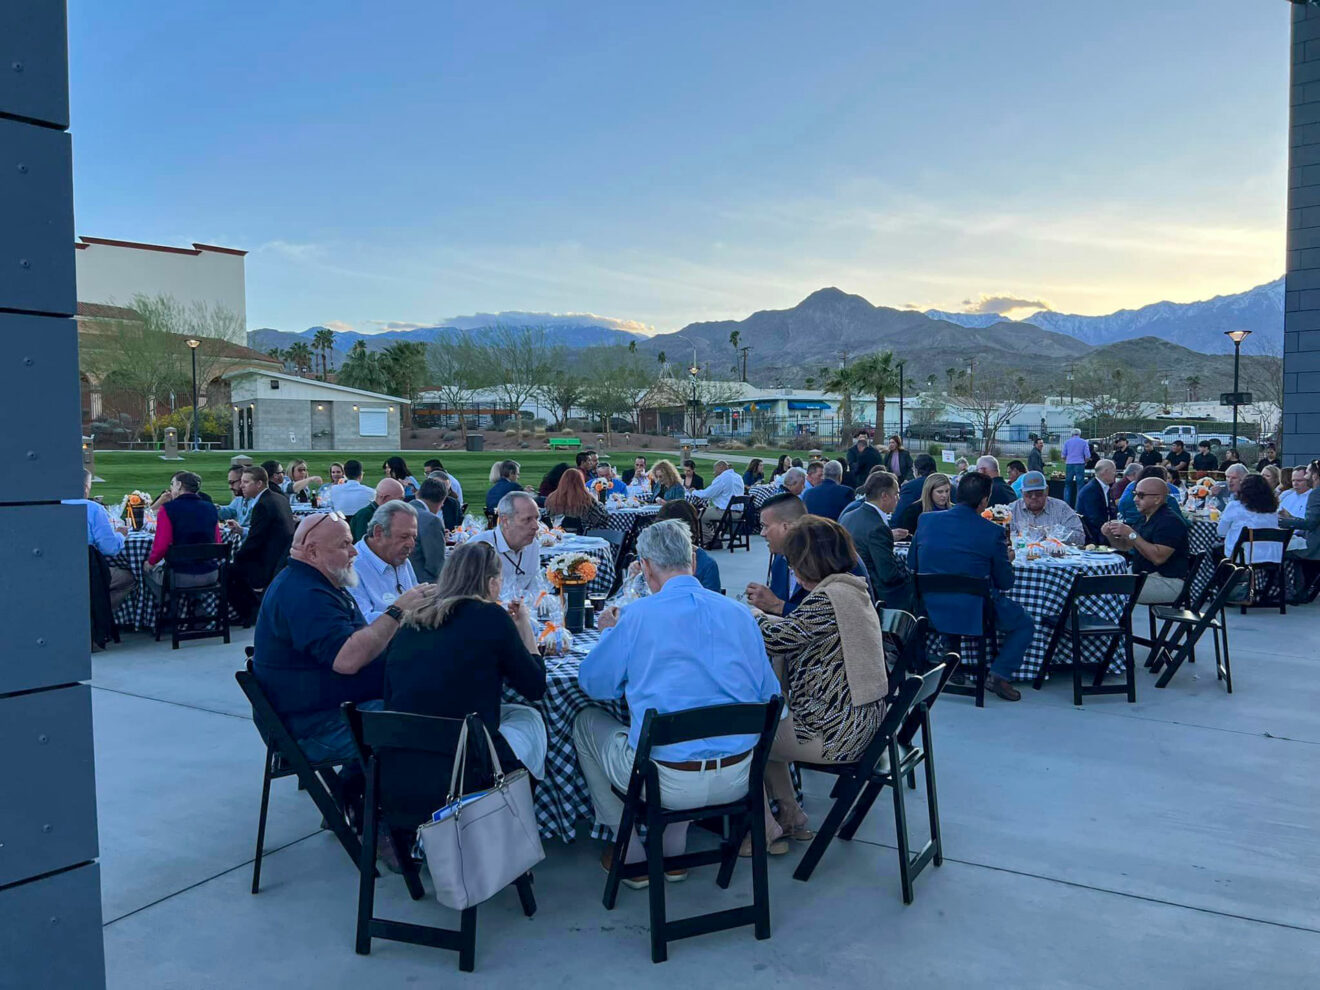 Cathedral City Hosts League of California Cities - Riverside County Division at Community Amphitheater